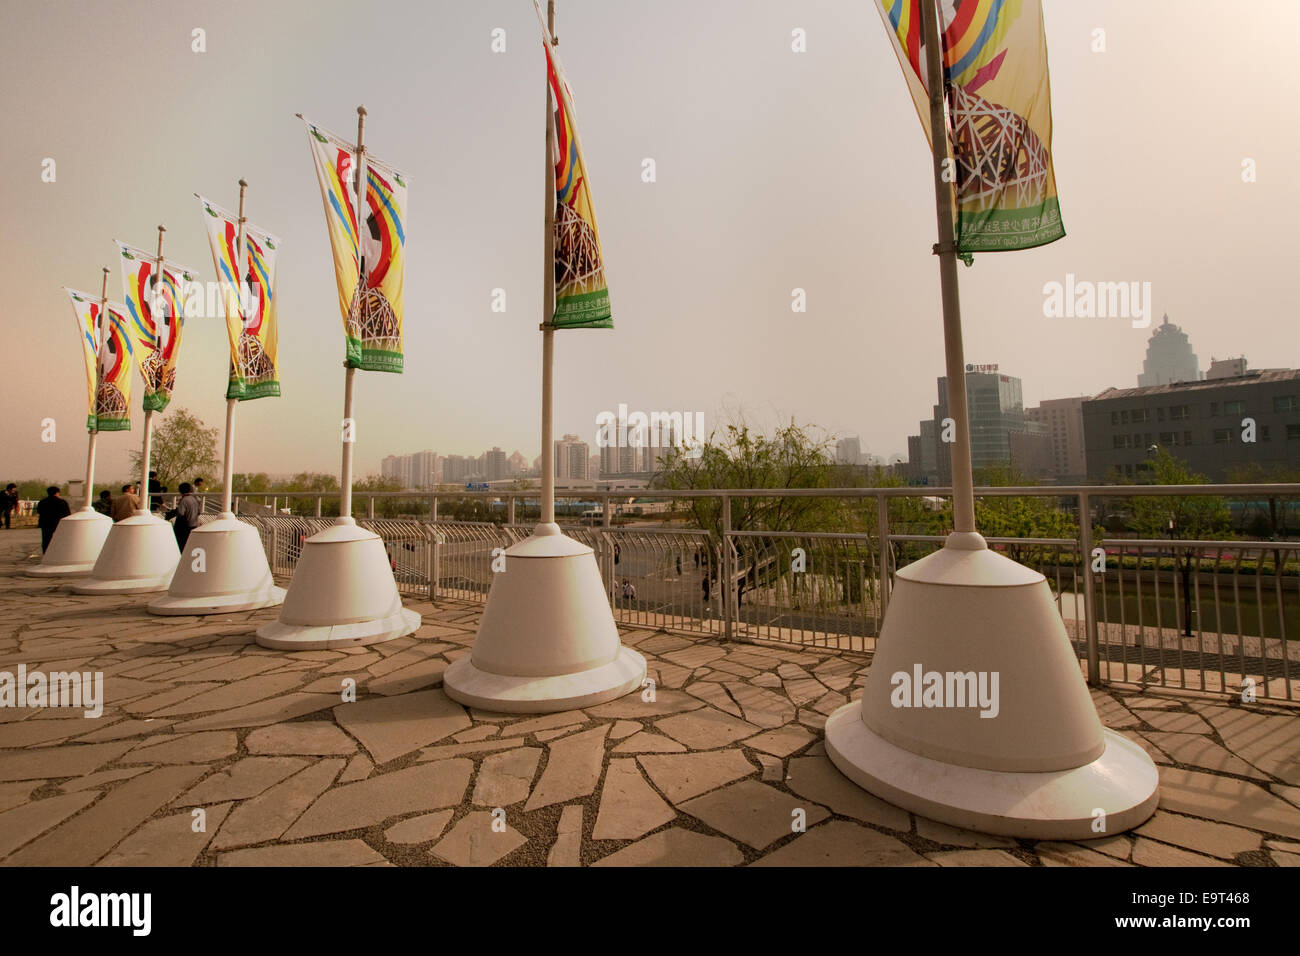 Flag poles at the Olympic Park, Beijing, China Stock Photo